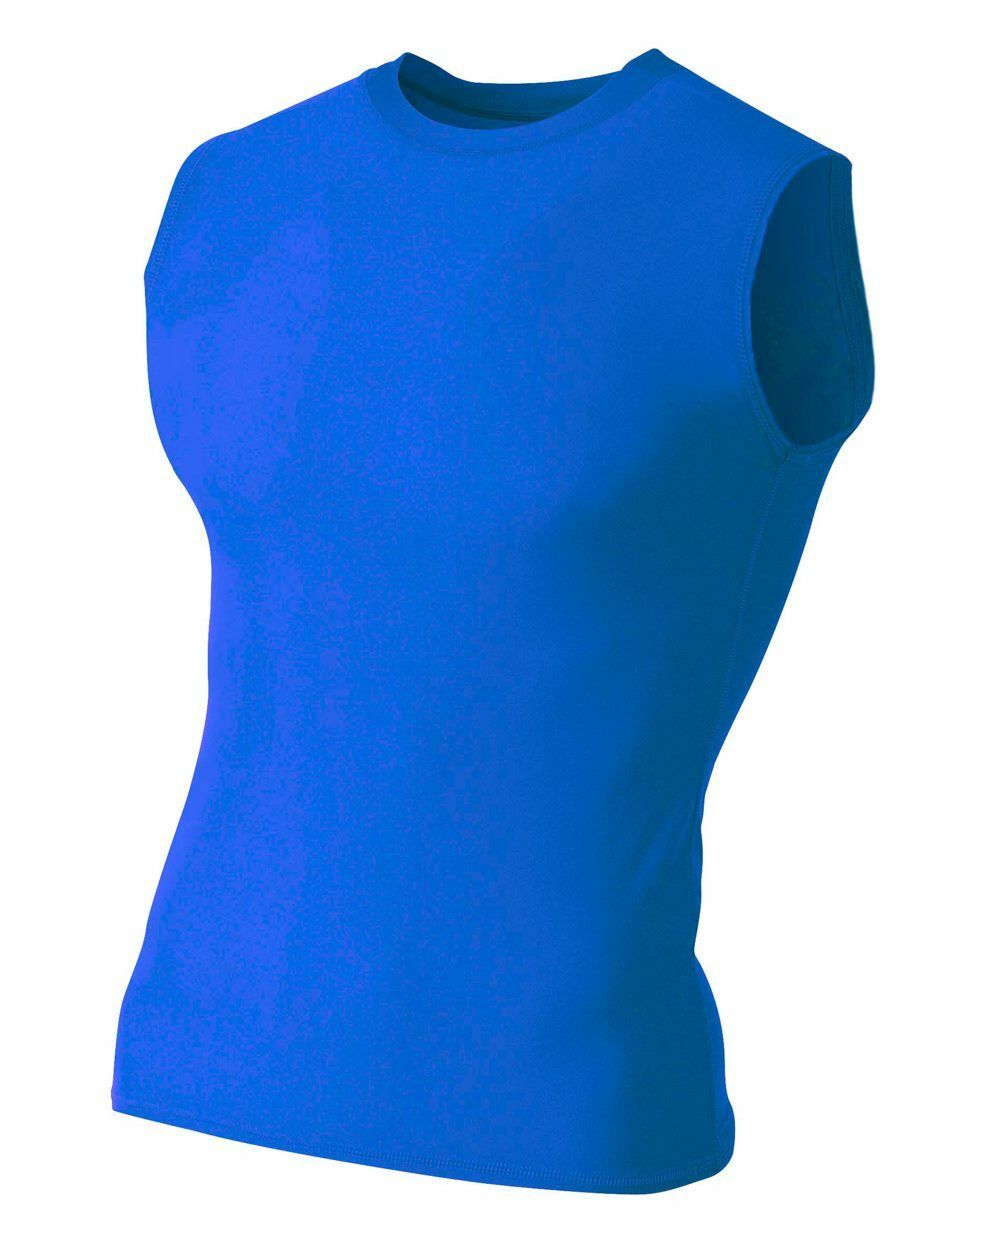 A4    ADULT  LARGE COMPRESSION MUSCLE SHIRT- ROYAL